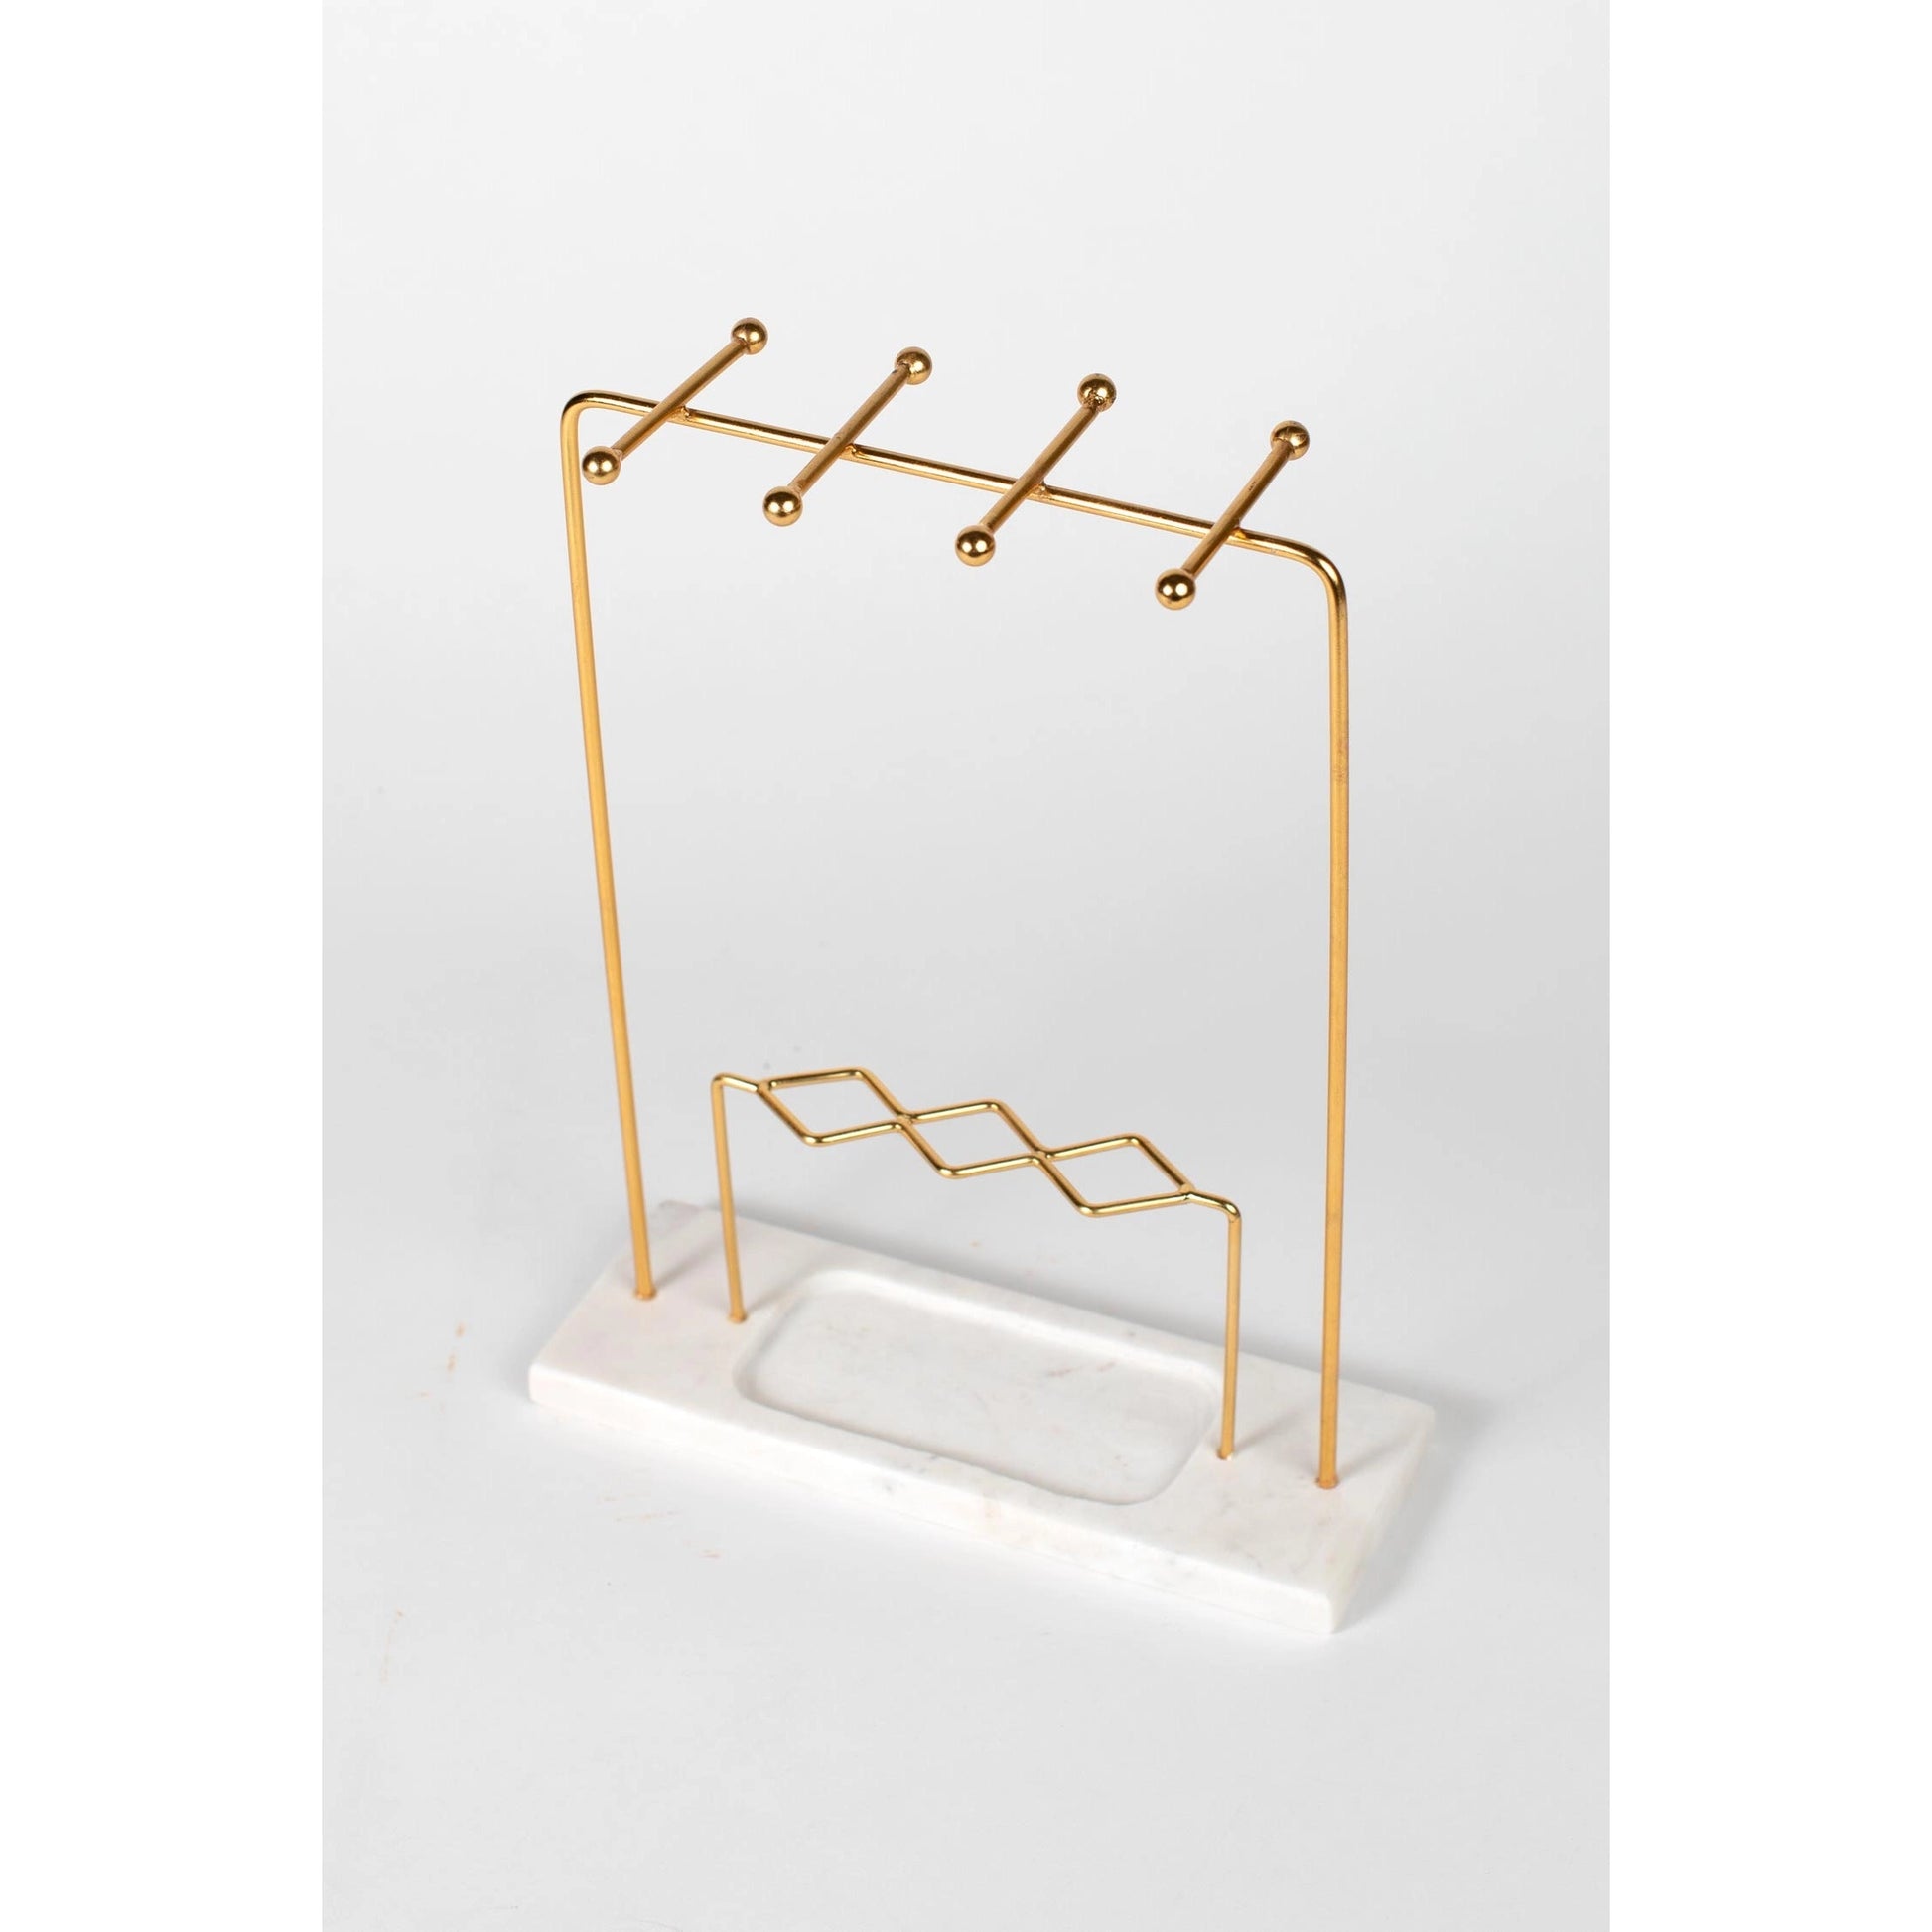 Marble Jewelry Stand - Global Hues Market